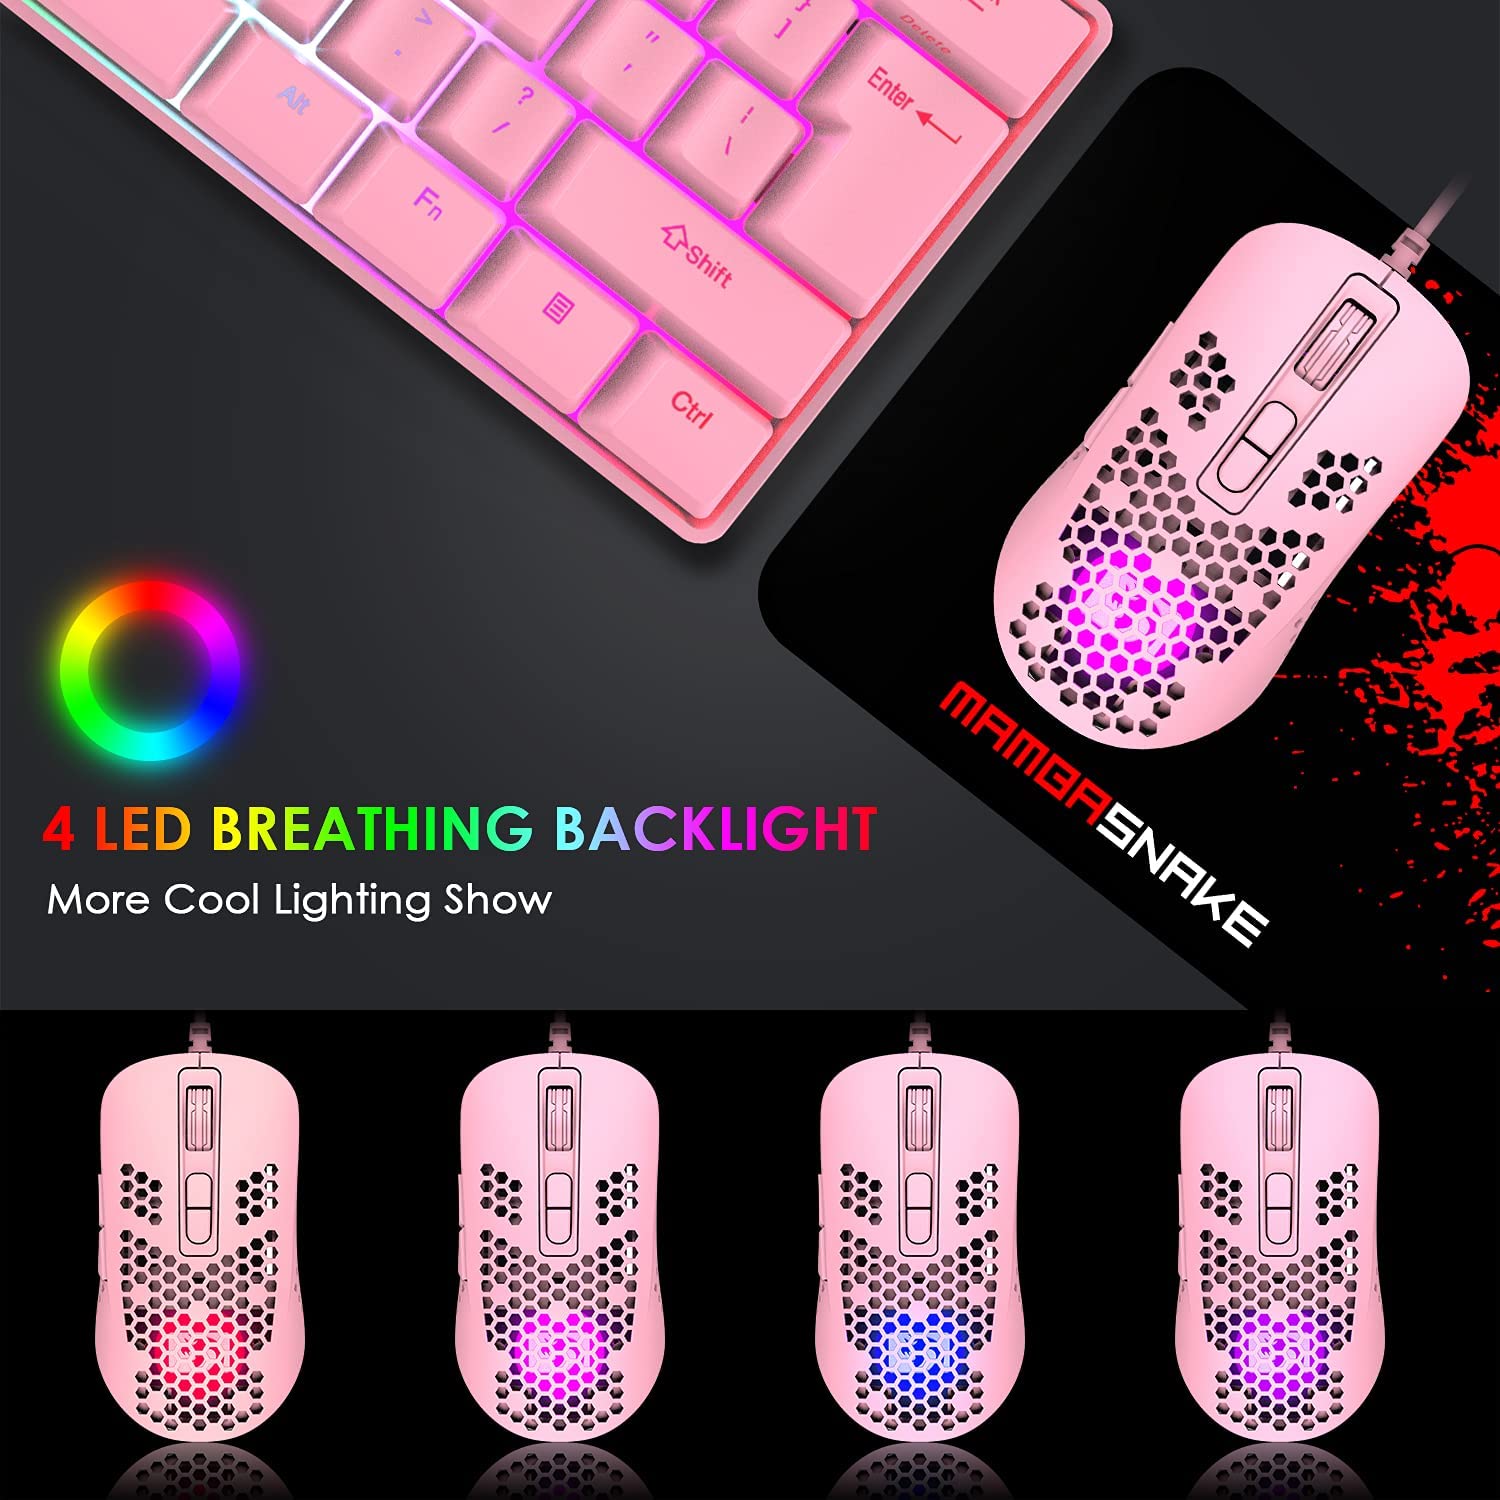 MAMBASNAKE 383 Lightweight Wired Mouse, USB Optical Computer Mice with RGB Backlit, 4 Adjustable DPI Up to 2400, Honeycomb Shell